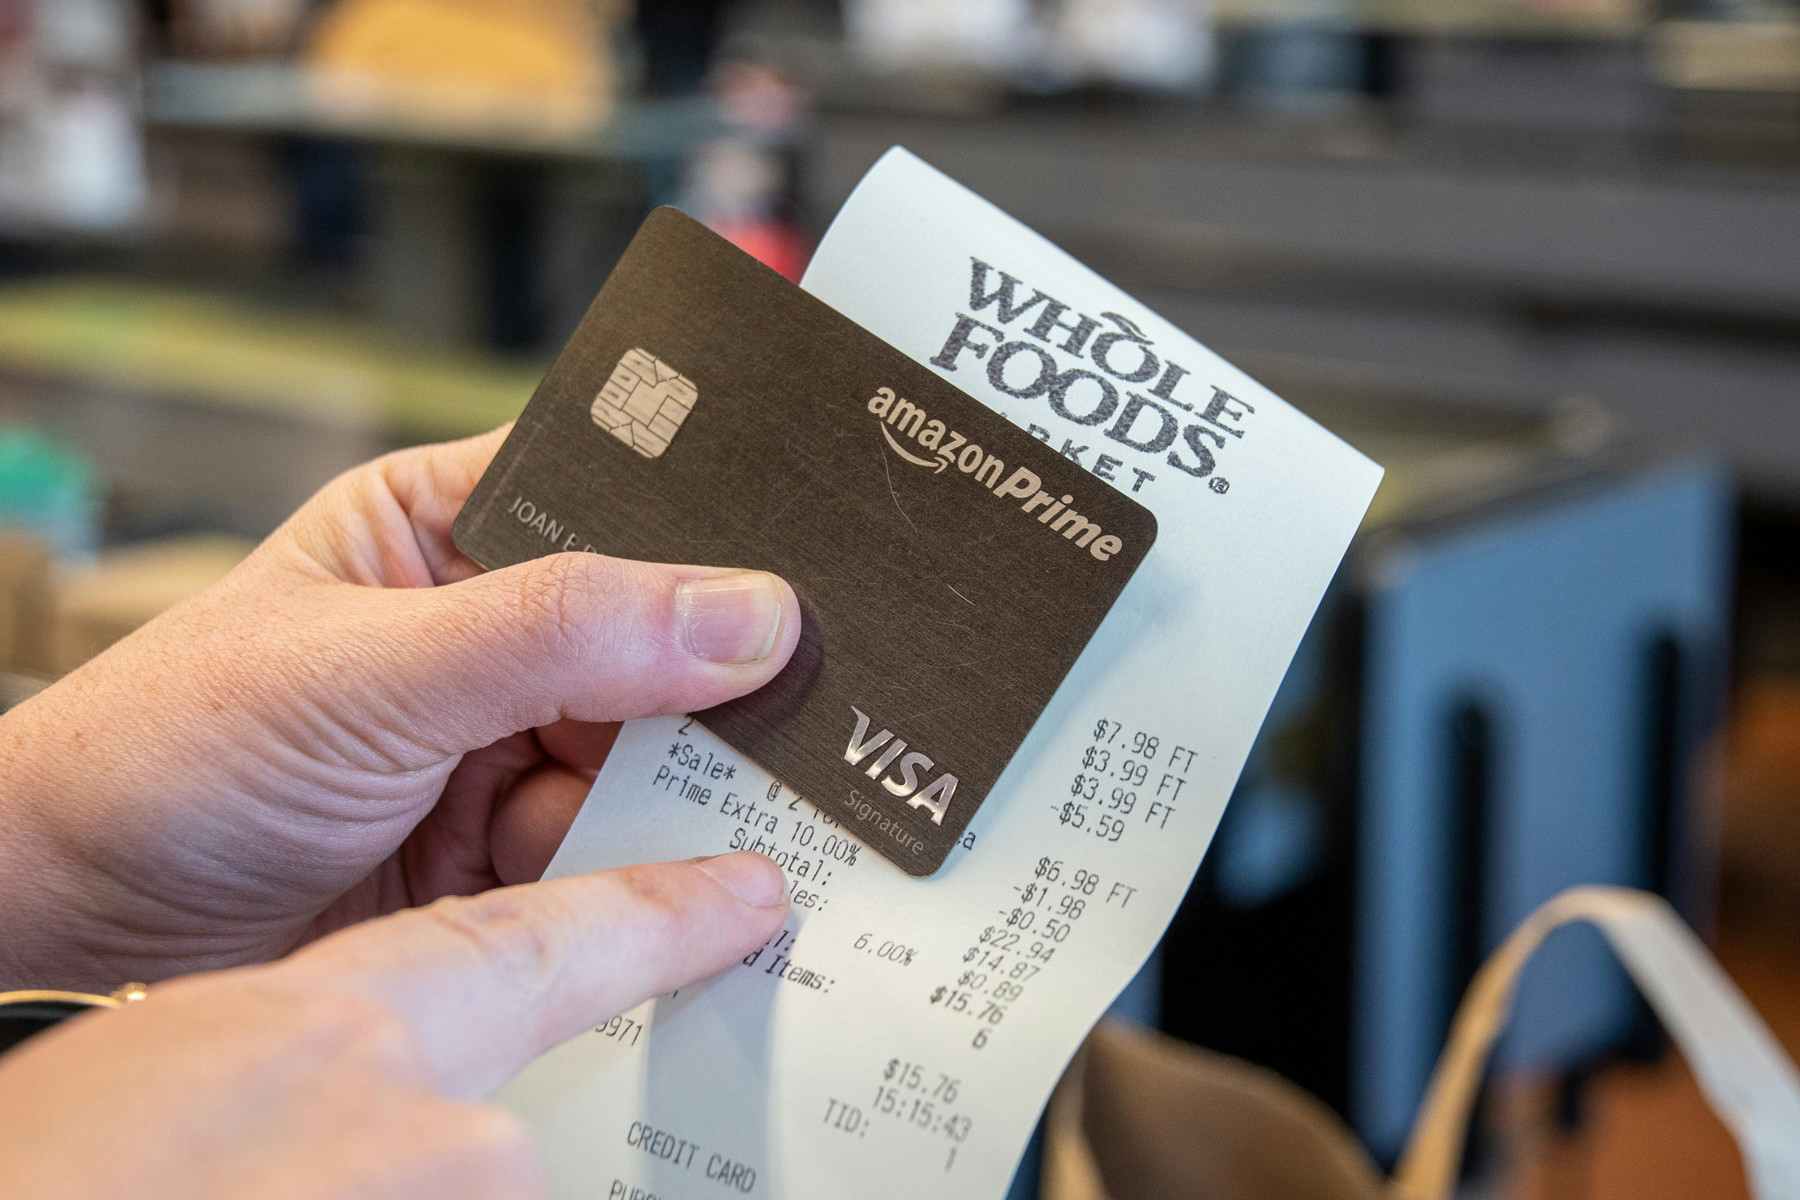 A person holding an Amazon Prime Visa credit card and a Whole Foods receipt in one hand while pointing to the receipt with their other hand.